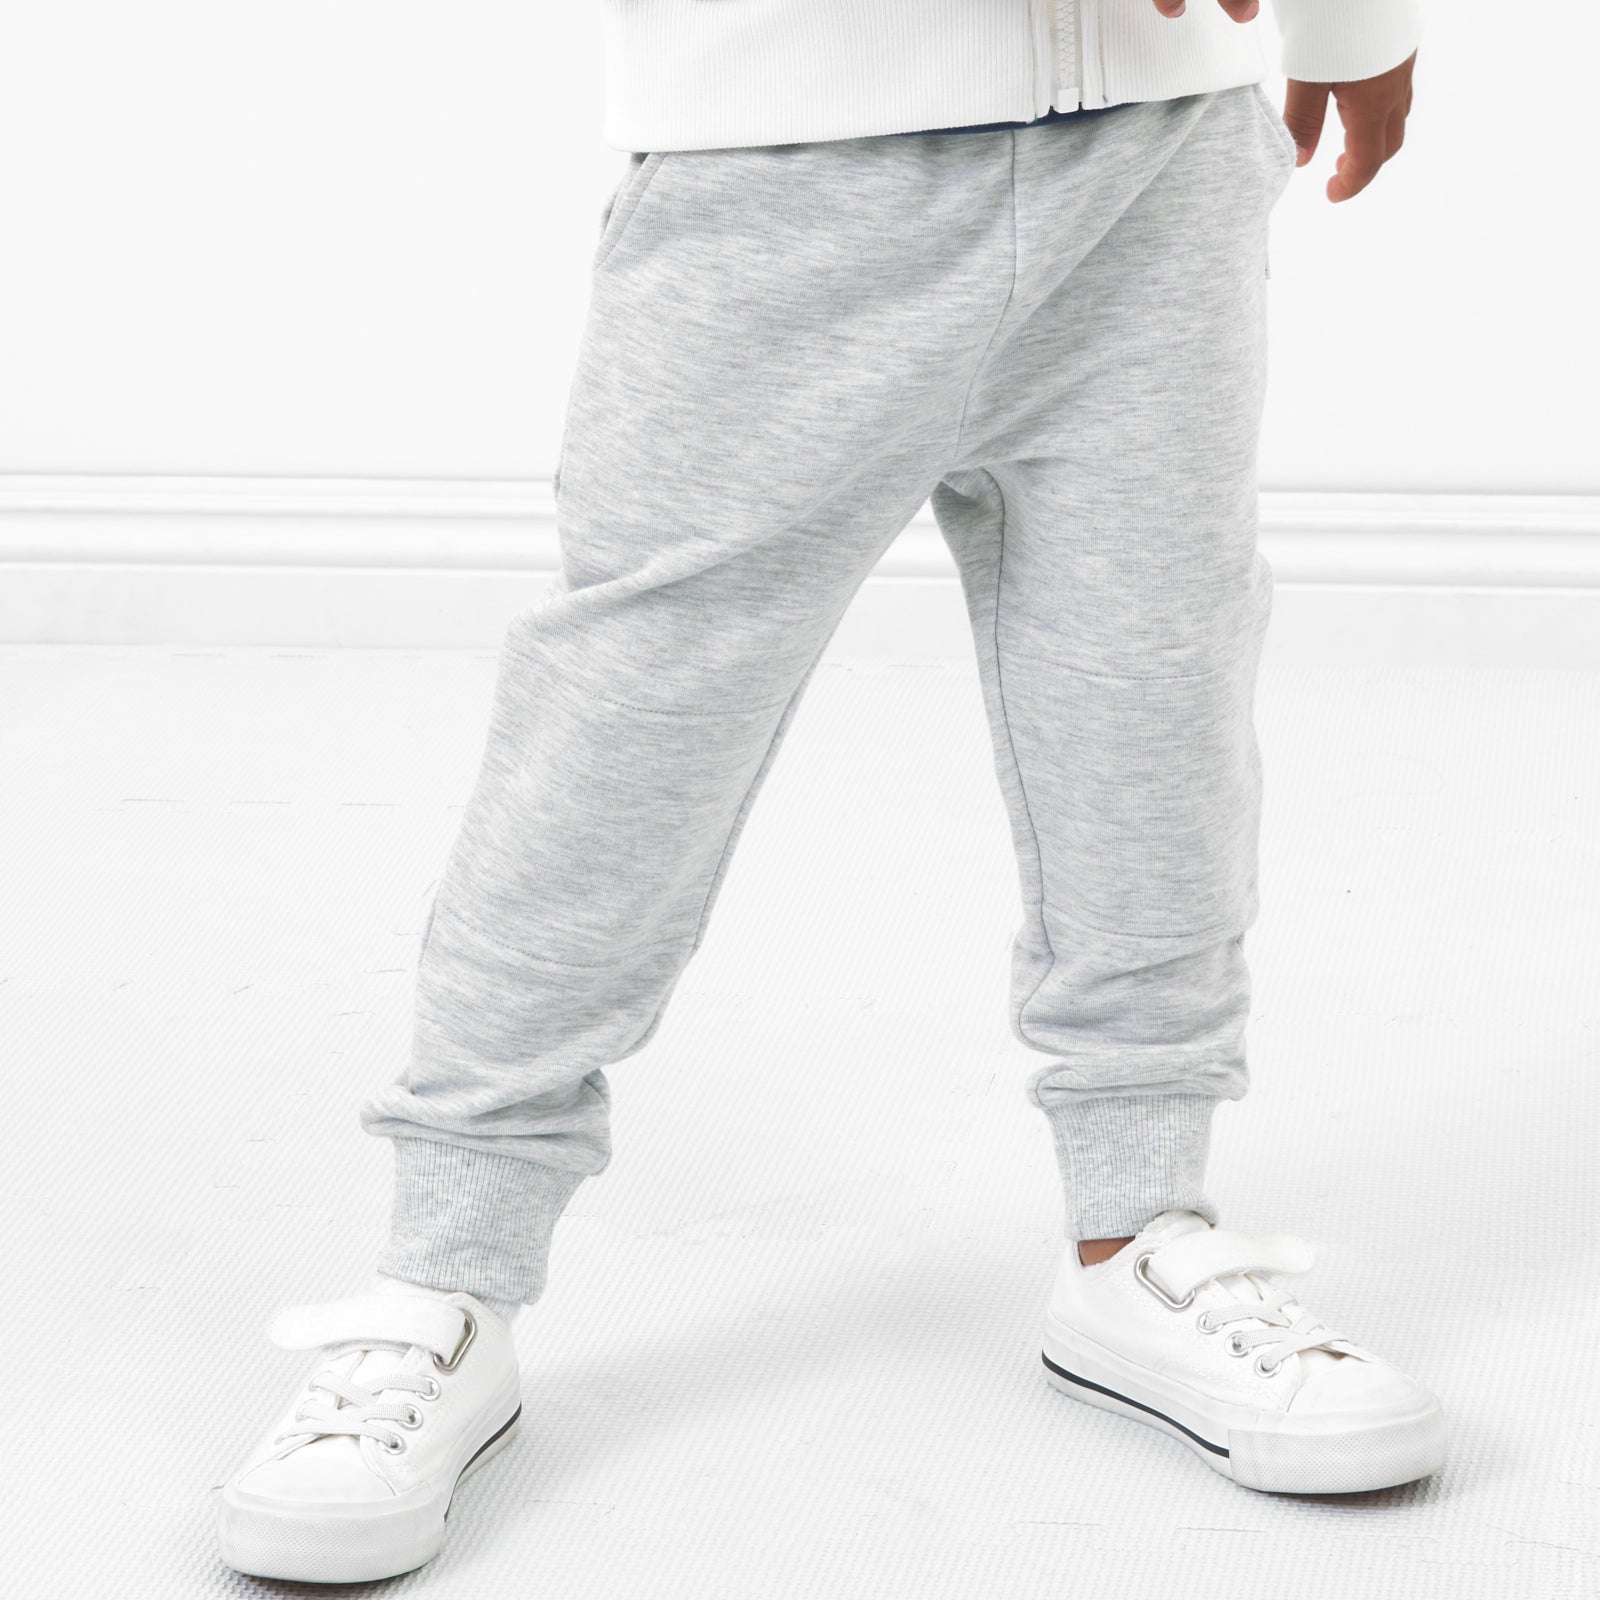 Close up image of a child posing wearing Light Heather Gray joggers